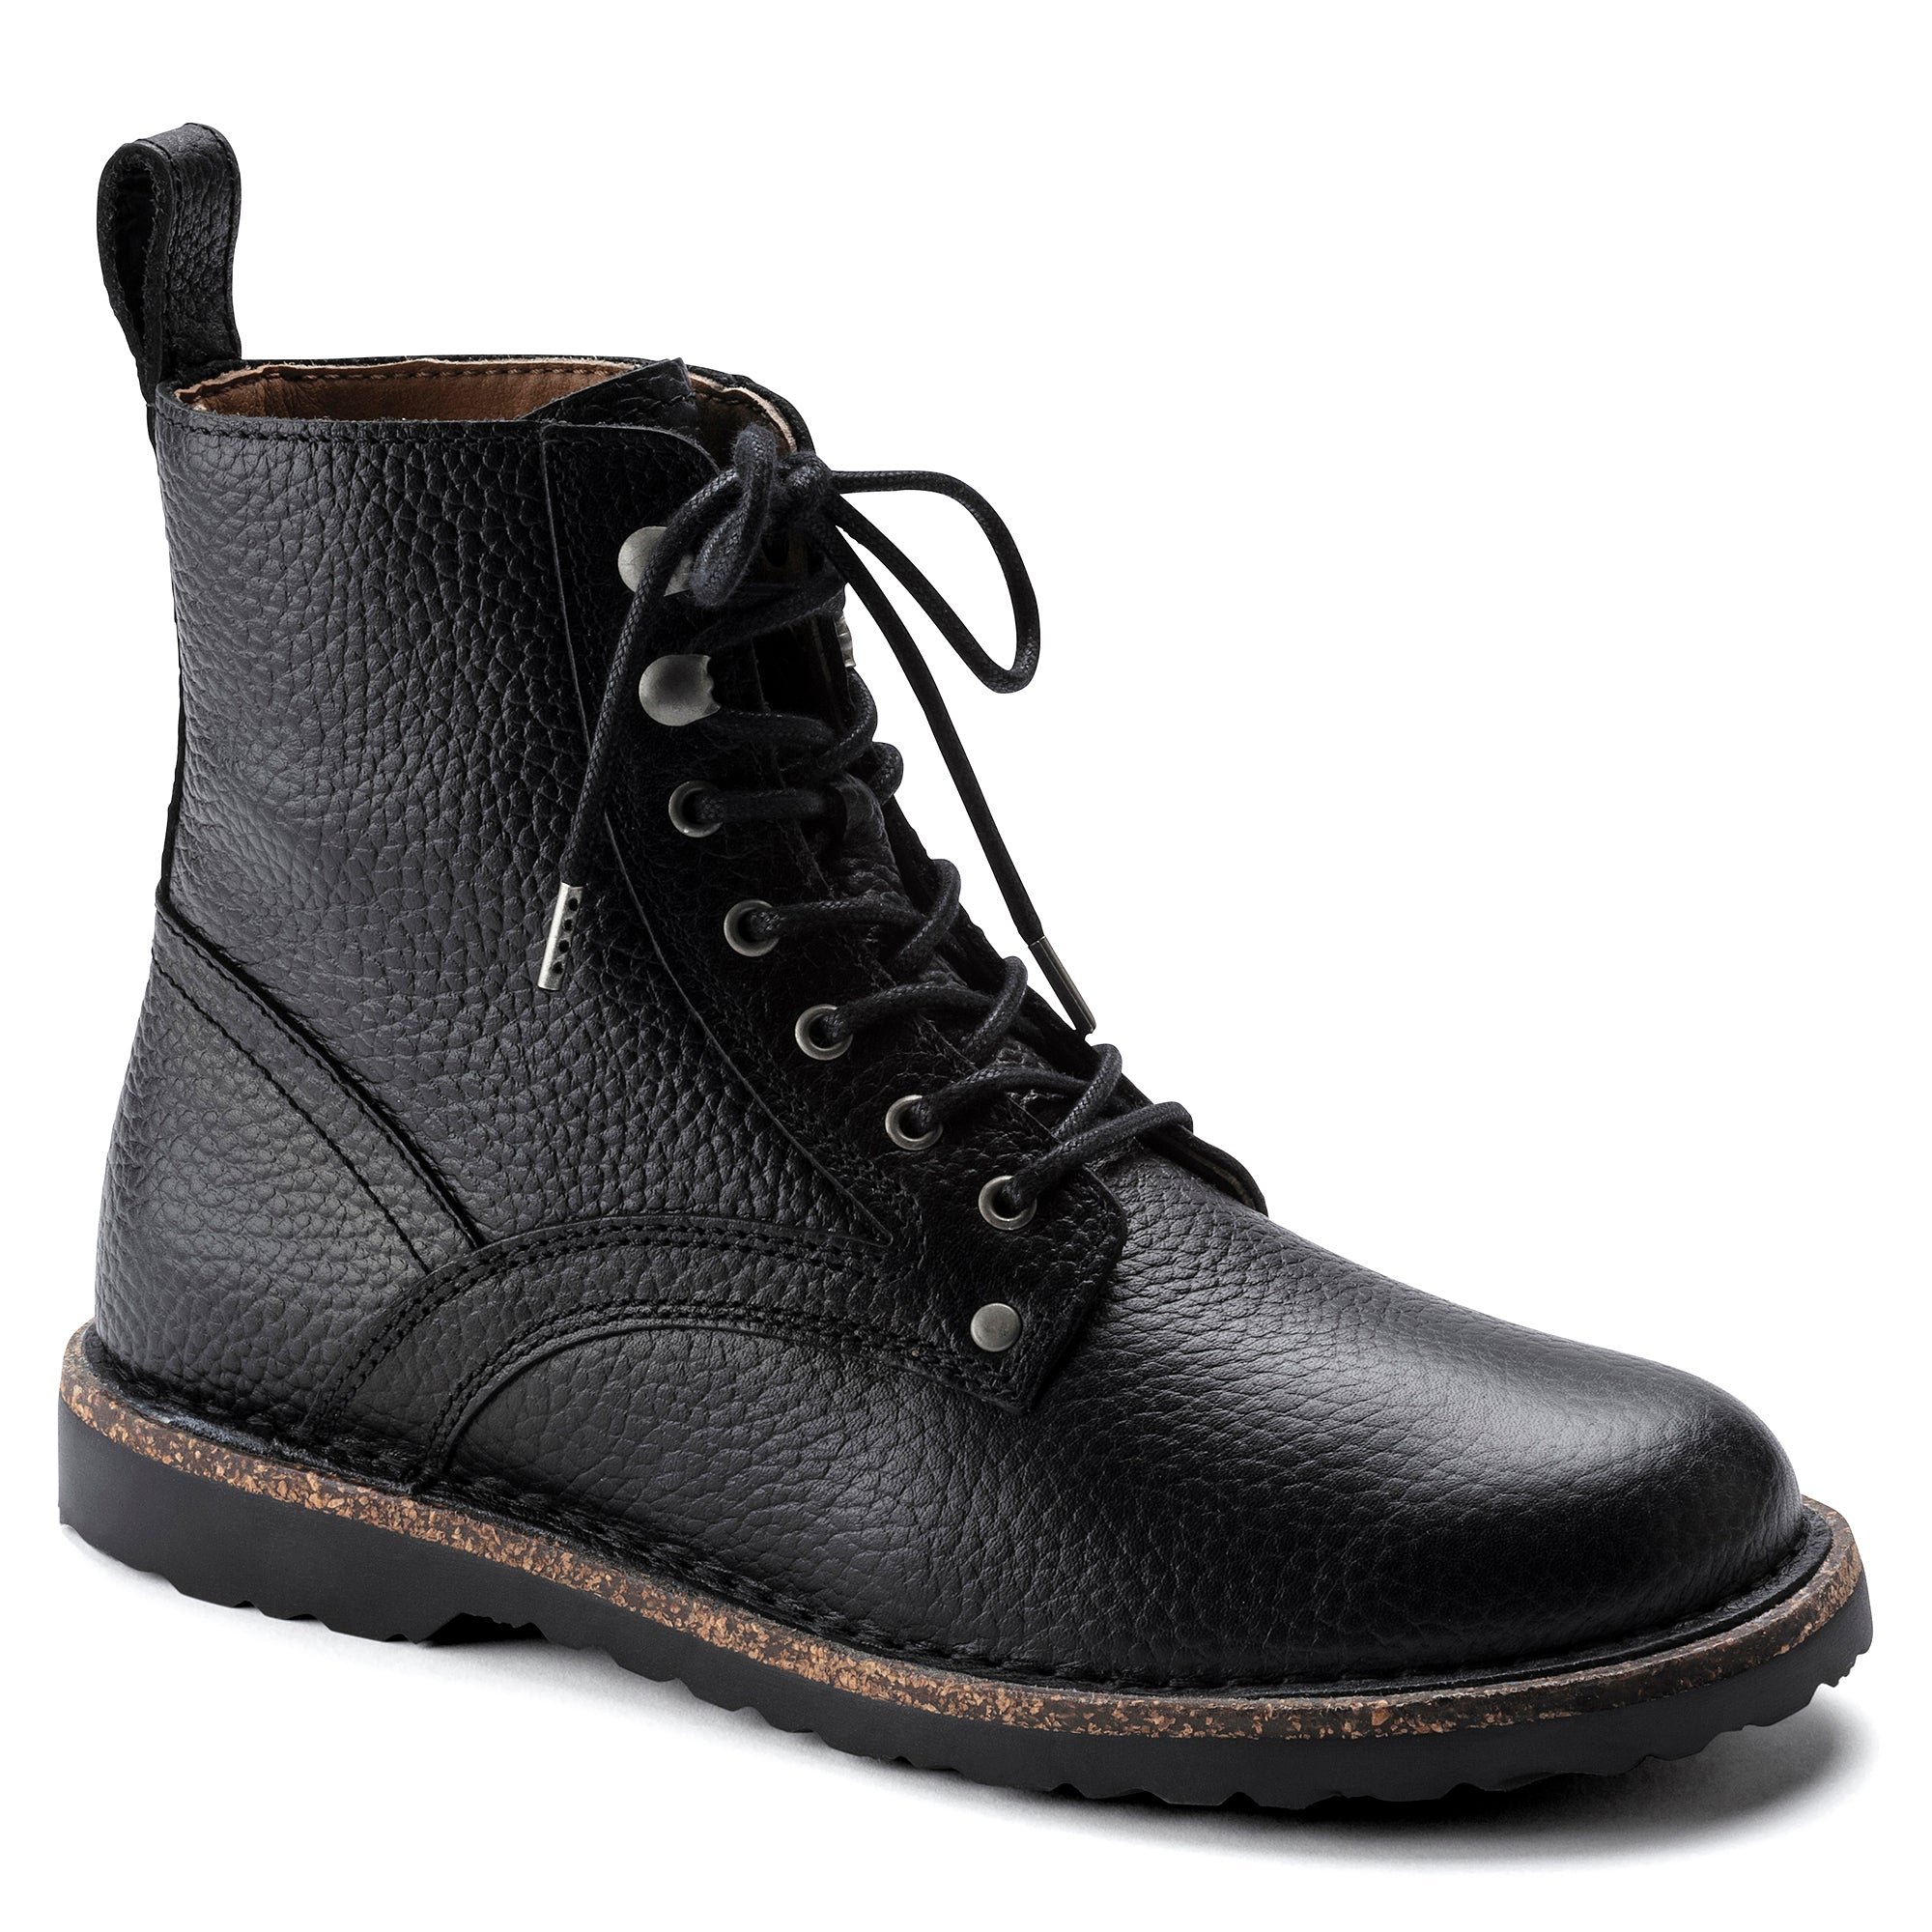 Bryson natural leather Black lace up boot